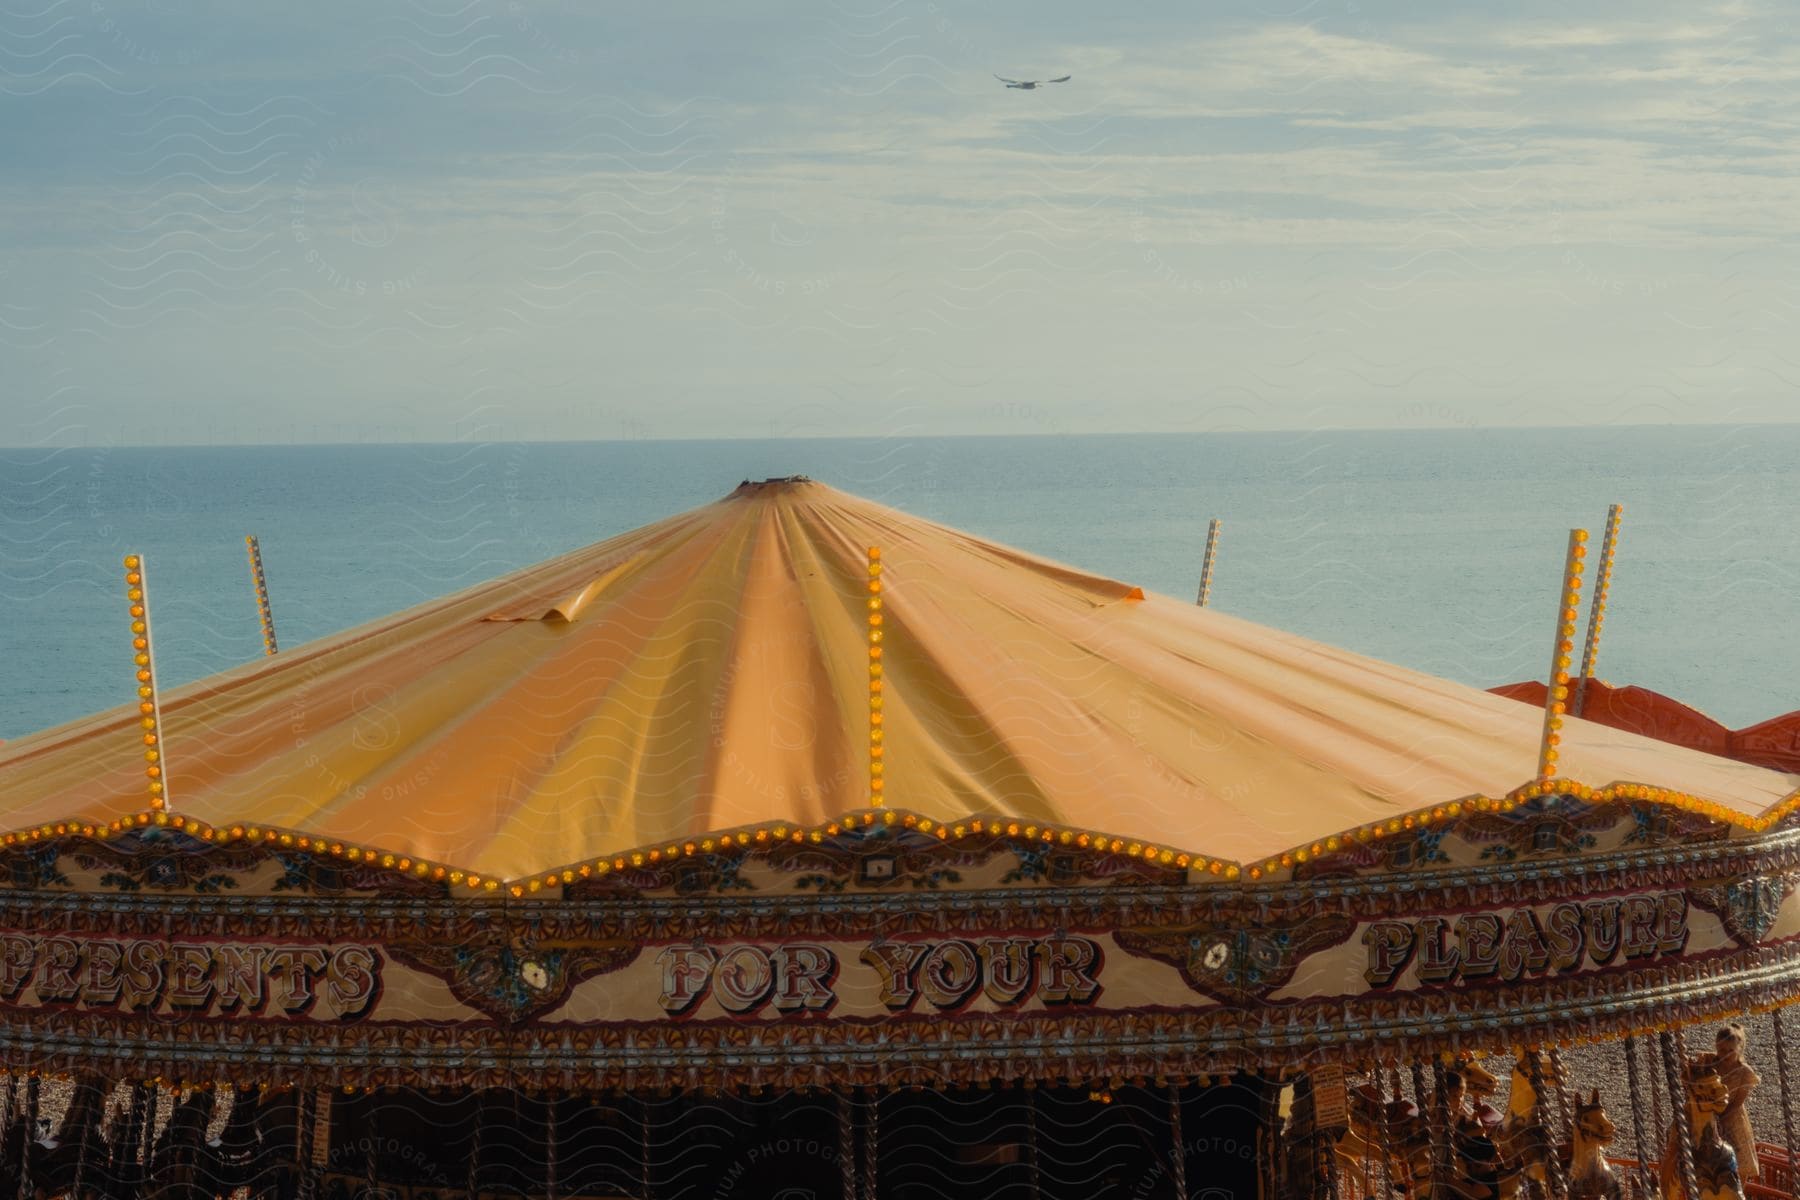 Tent topping a carousel as people are riding and having fun along the coast